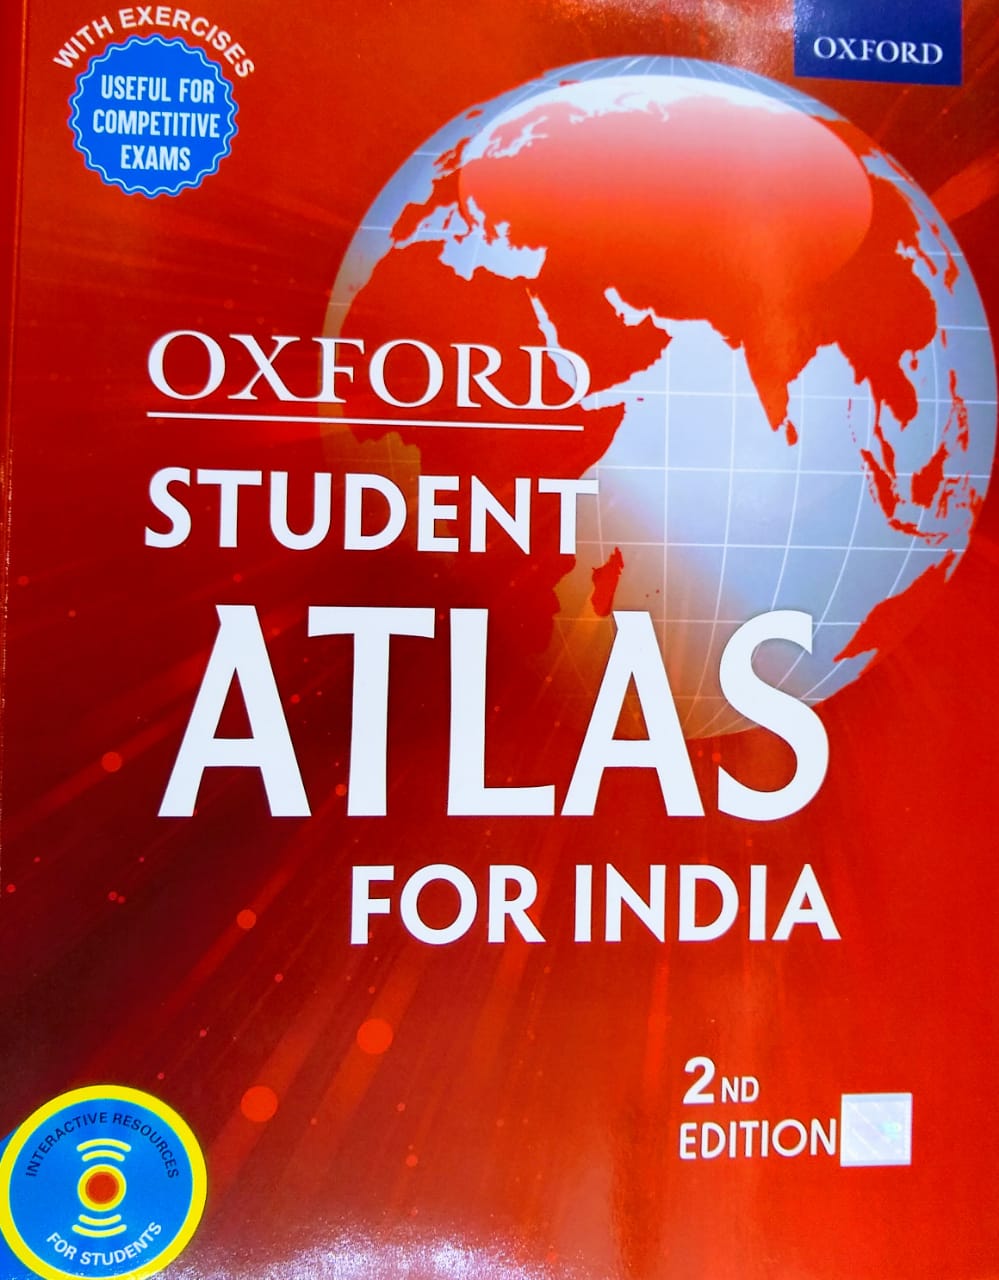 OXFORD-STUDENT-ATLAS-FOR-INDIA-2ND-EDITION.jpeg